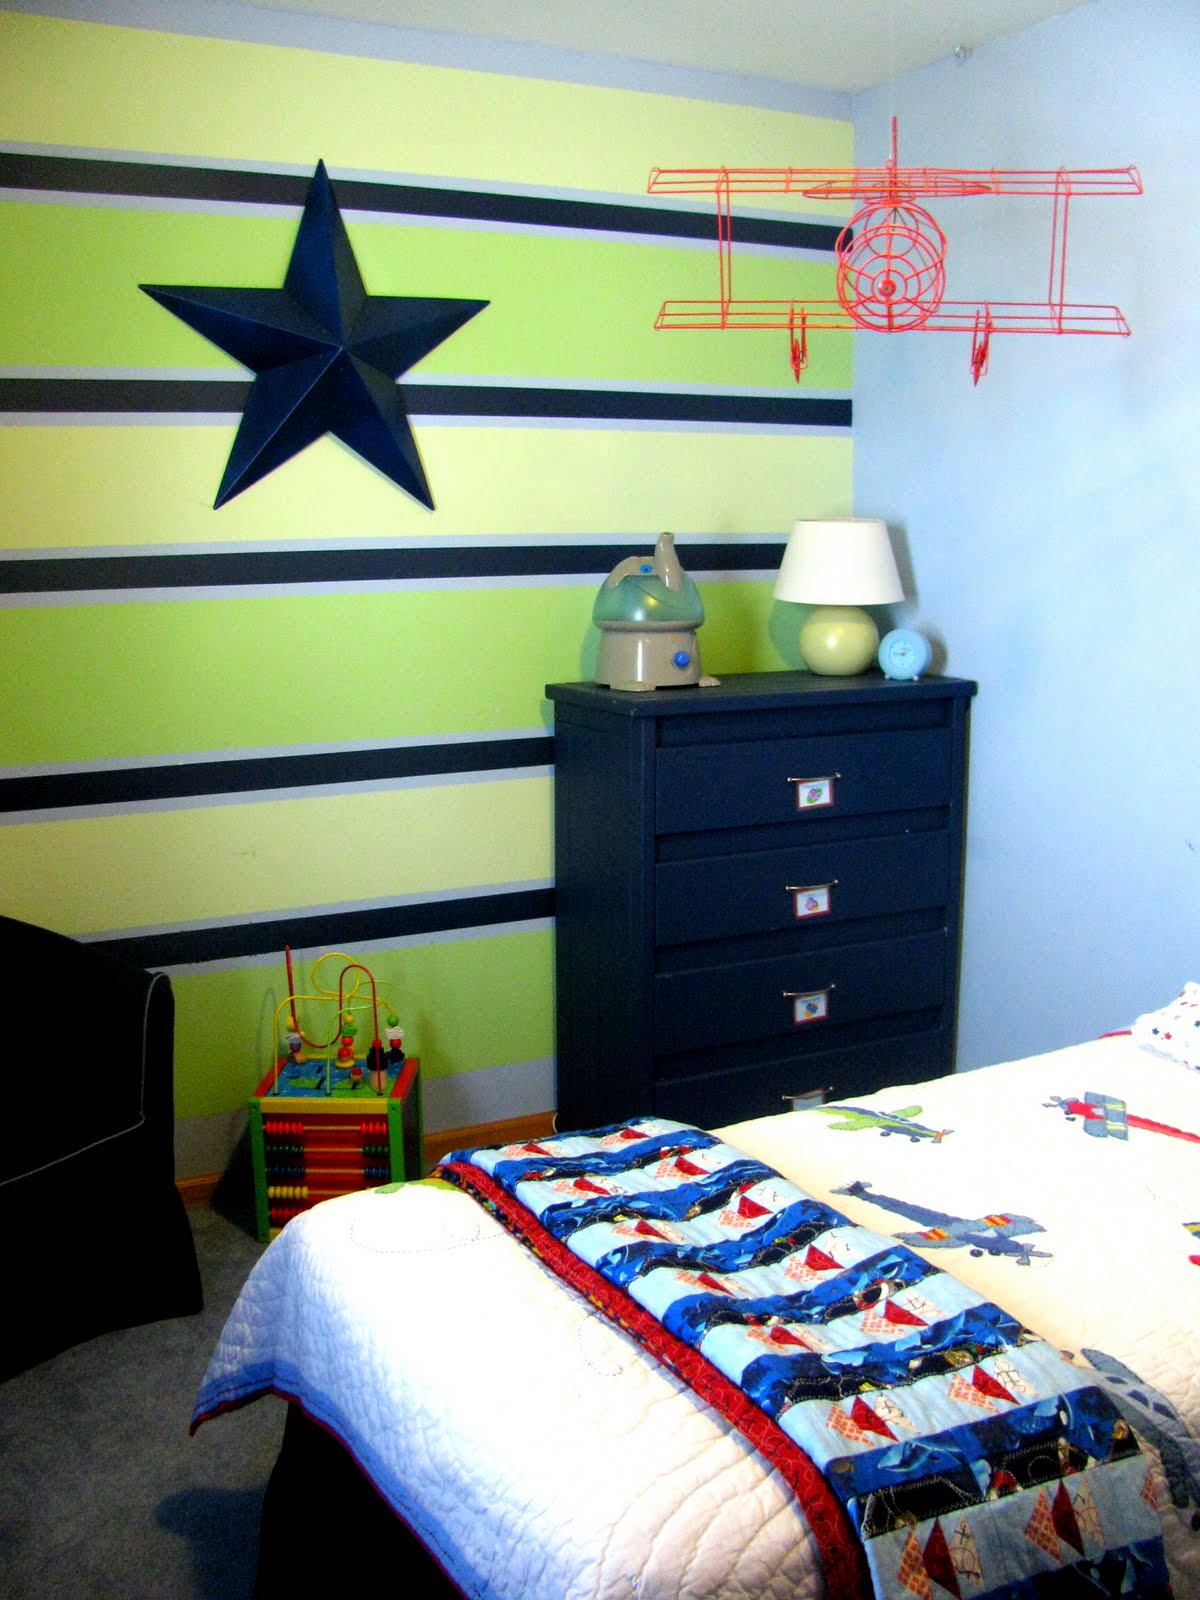 Interior Boys Ideas Small Interior Boys Room Paint Ideas With Blue And Green Wall Color Completed With Black Wooden Dresser Design Ideas Kids Room Boys Room Paint Ideas For Adventurous Imagination